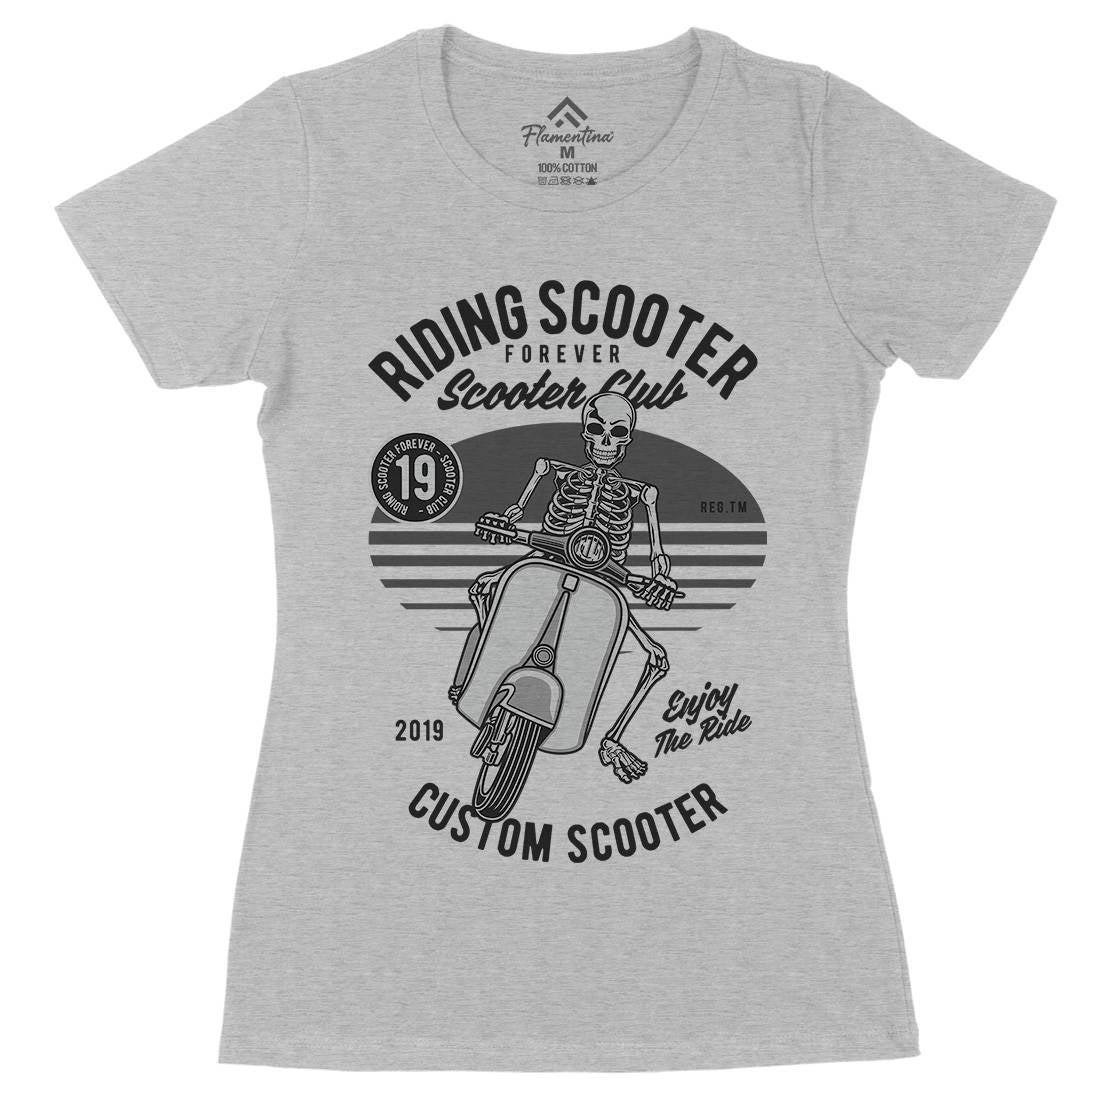 Riding Scooter Womens Organic Crew Neck T-Shirt Motorcycles D570